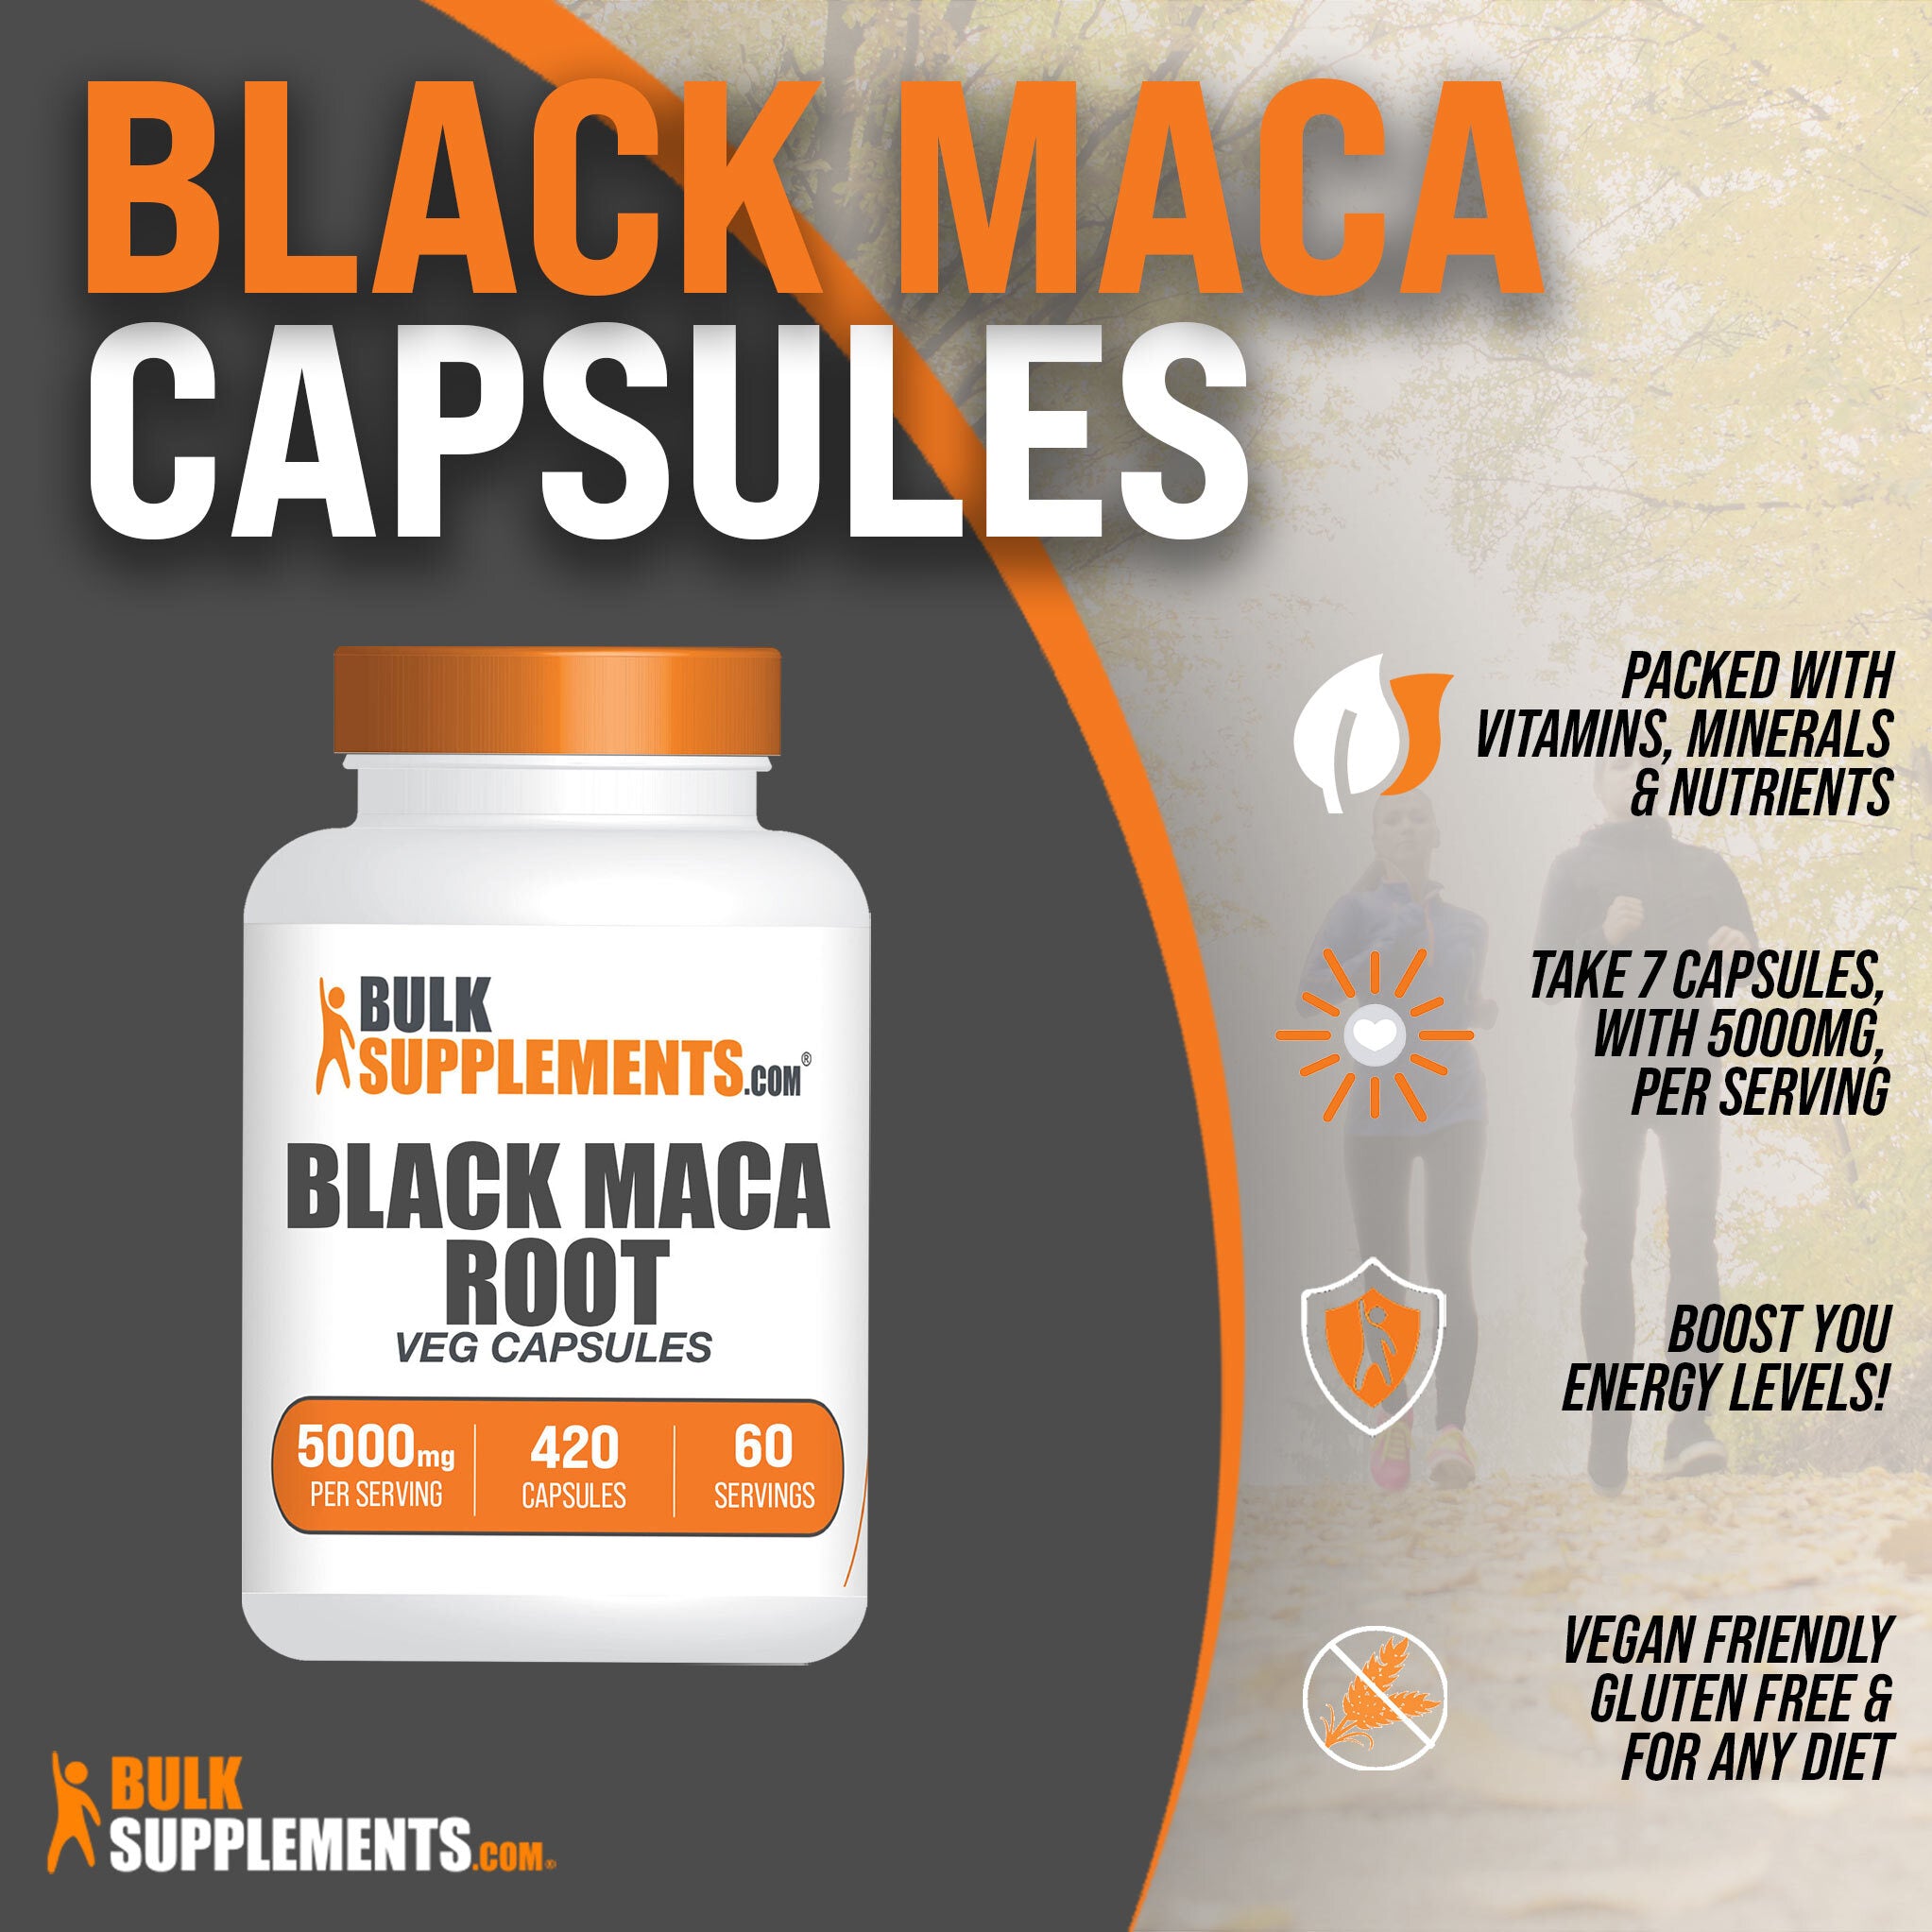 vegan black maca capsules are packed with vitamins, minerals, can boost energy levels